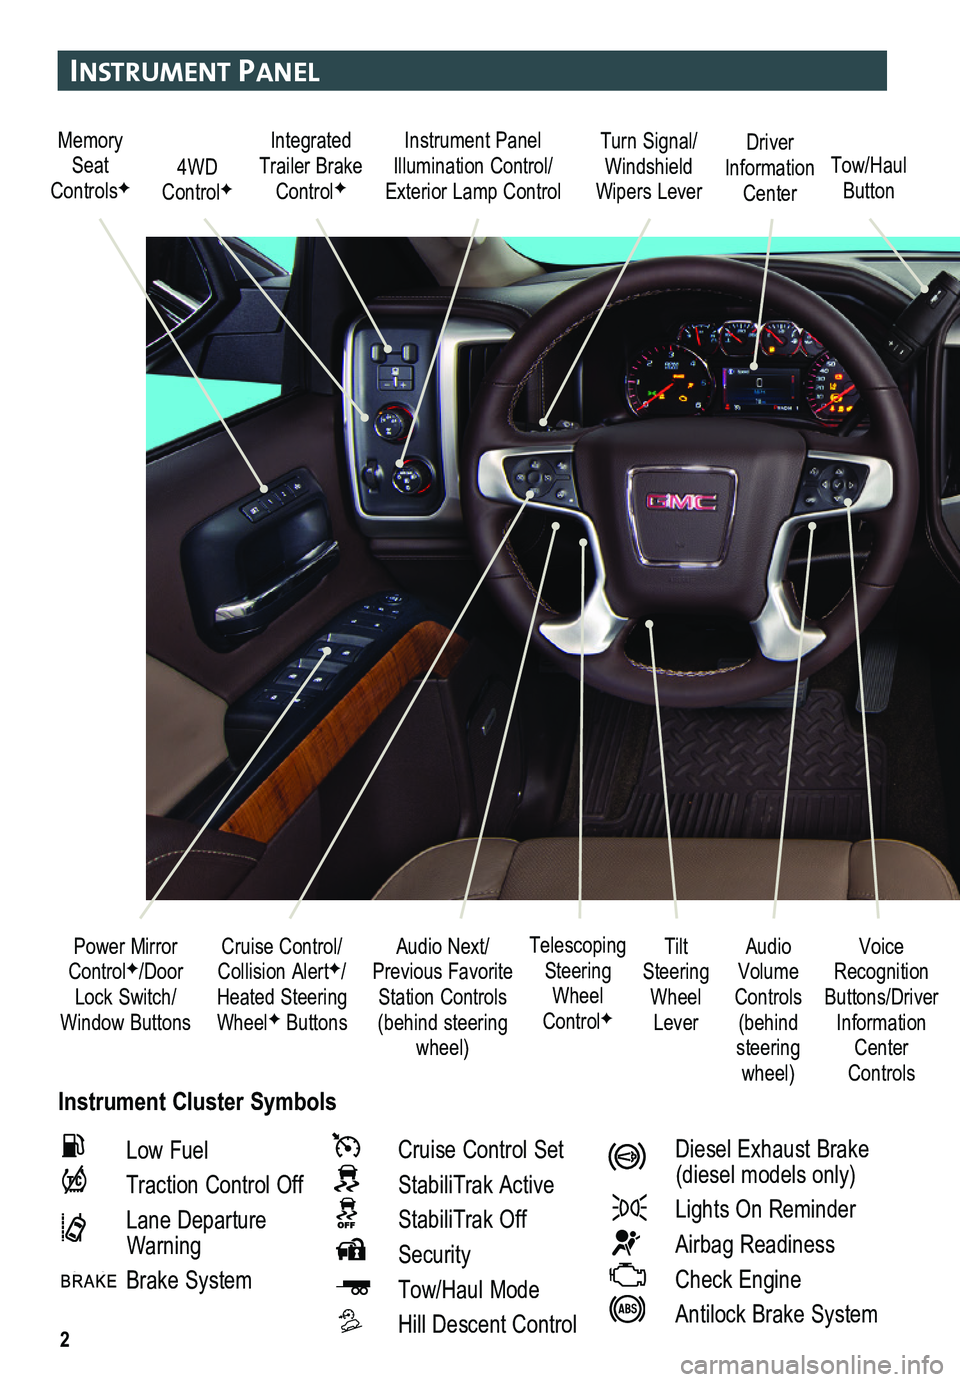 GMC SIERRA 2015  Get To Know Guide 2
Instrument Panel
Instrument Cluster Symbols
Audio Next/Previous Favorite Station Controls (behind steering wheel)
Cruise Control/ Collision AlertF/Heated Steering WheelF Buttons
Power Mirror Control